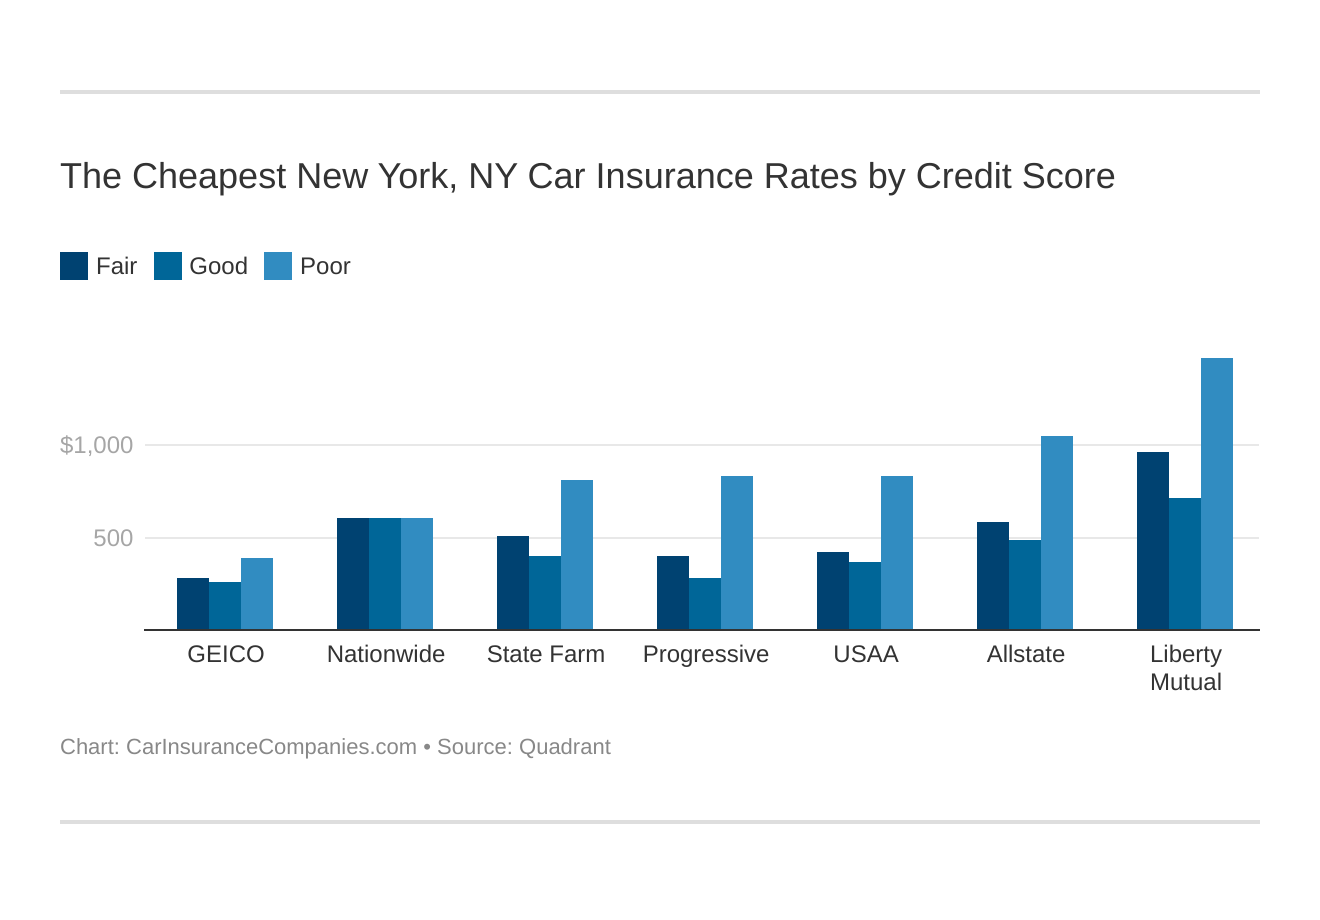 The Cheapest New York, NY Car Insurance Rates by Credit Score